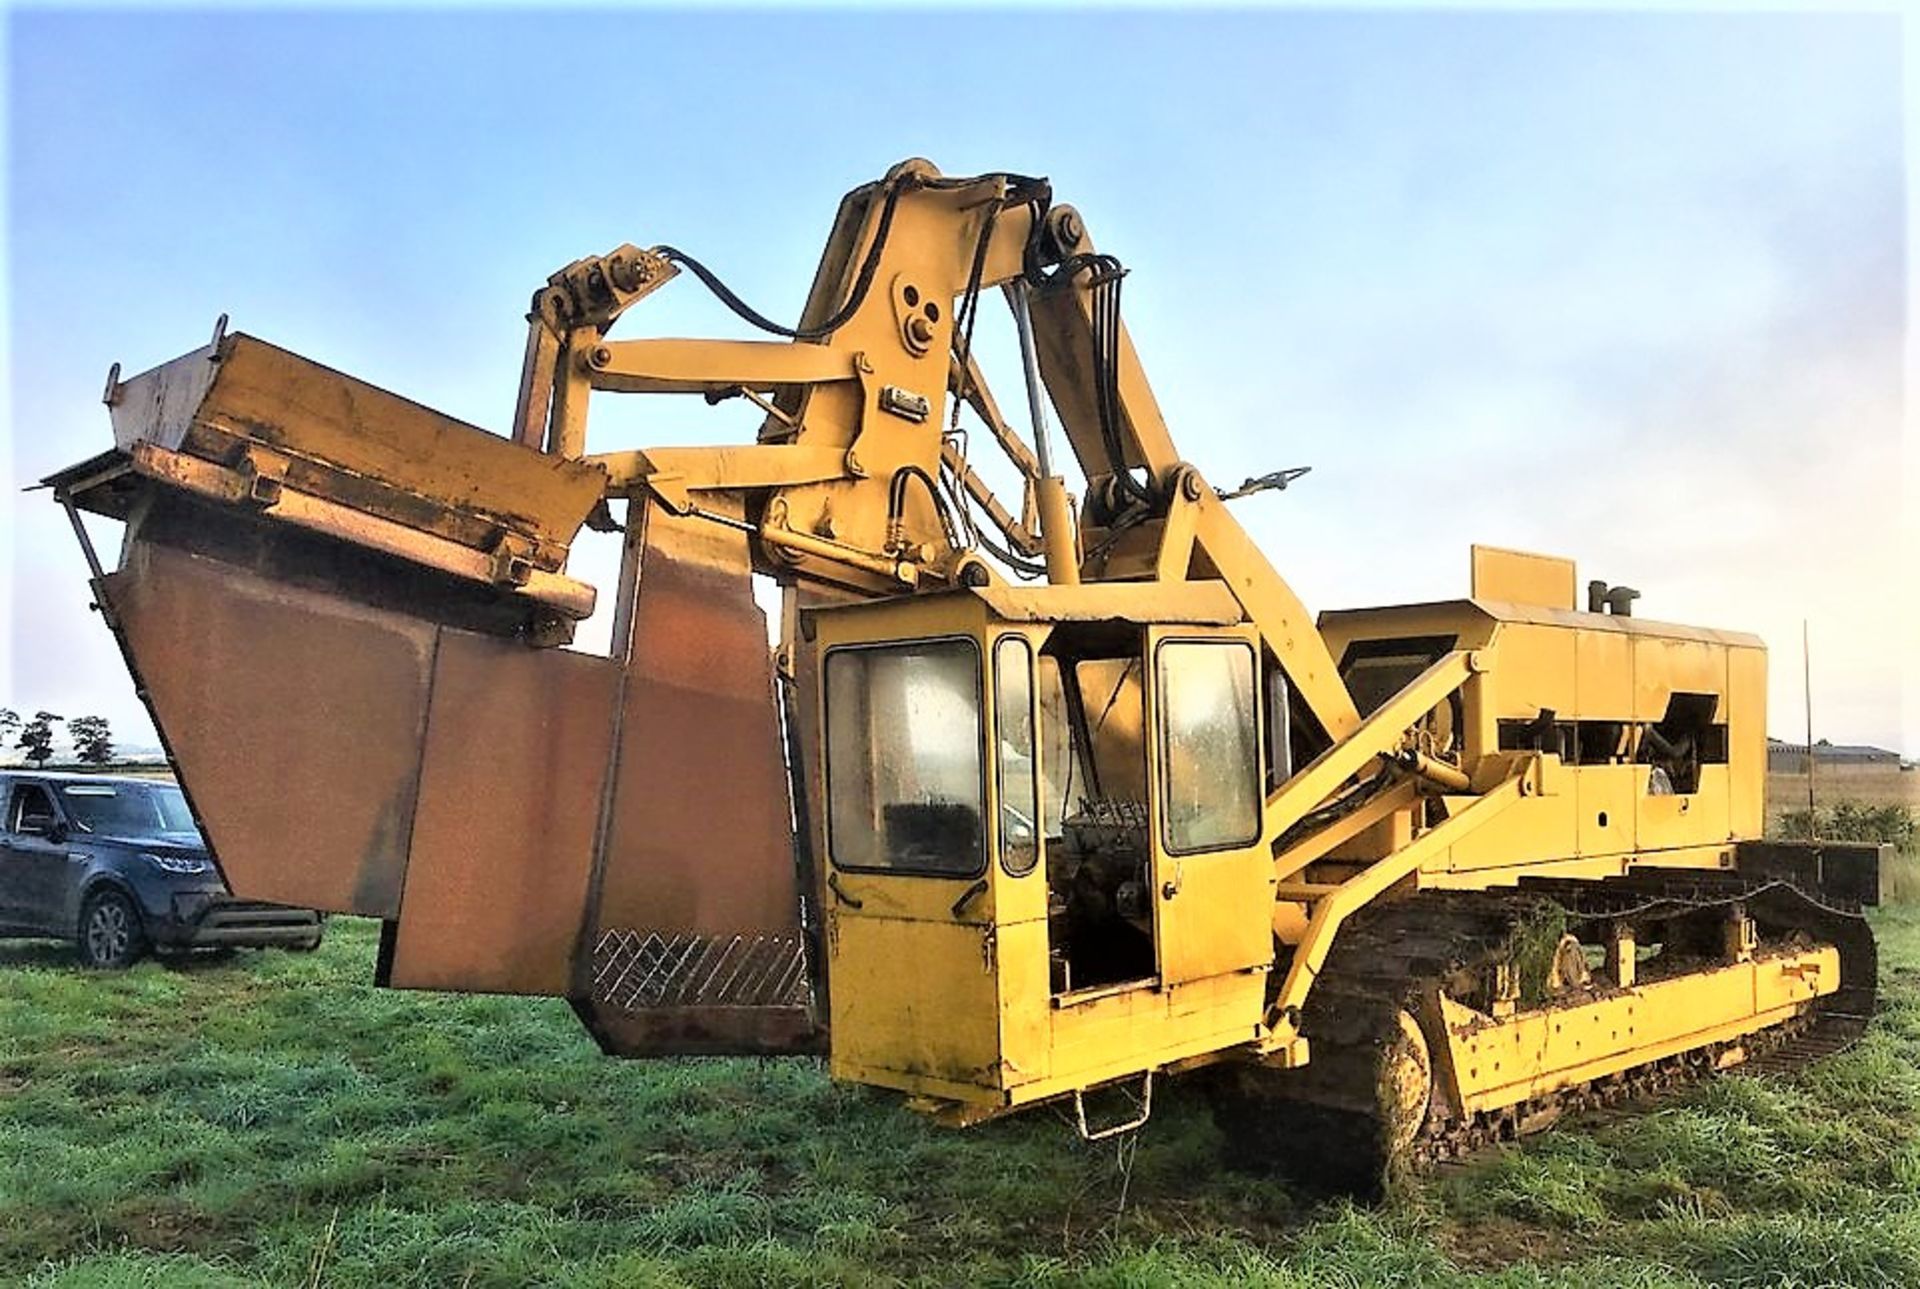 1984 INTER-DRAIN LTD Trenchless. Model 2032GP. S/N D84051. Tracked trencher. Trimble laser control s - Image 24 of 30